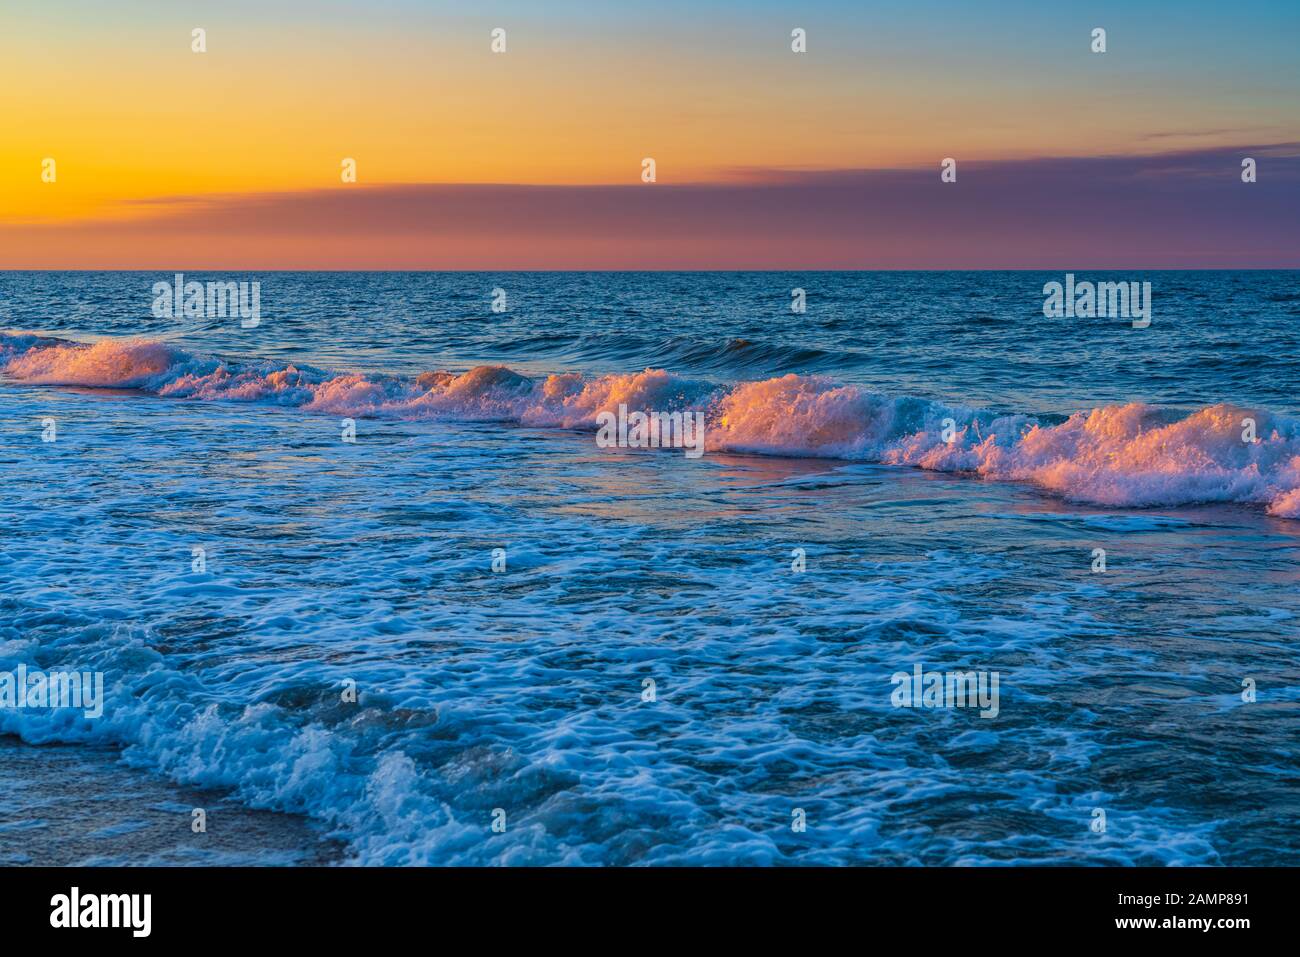 Sea beach in sunset colors Stock Photo